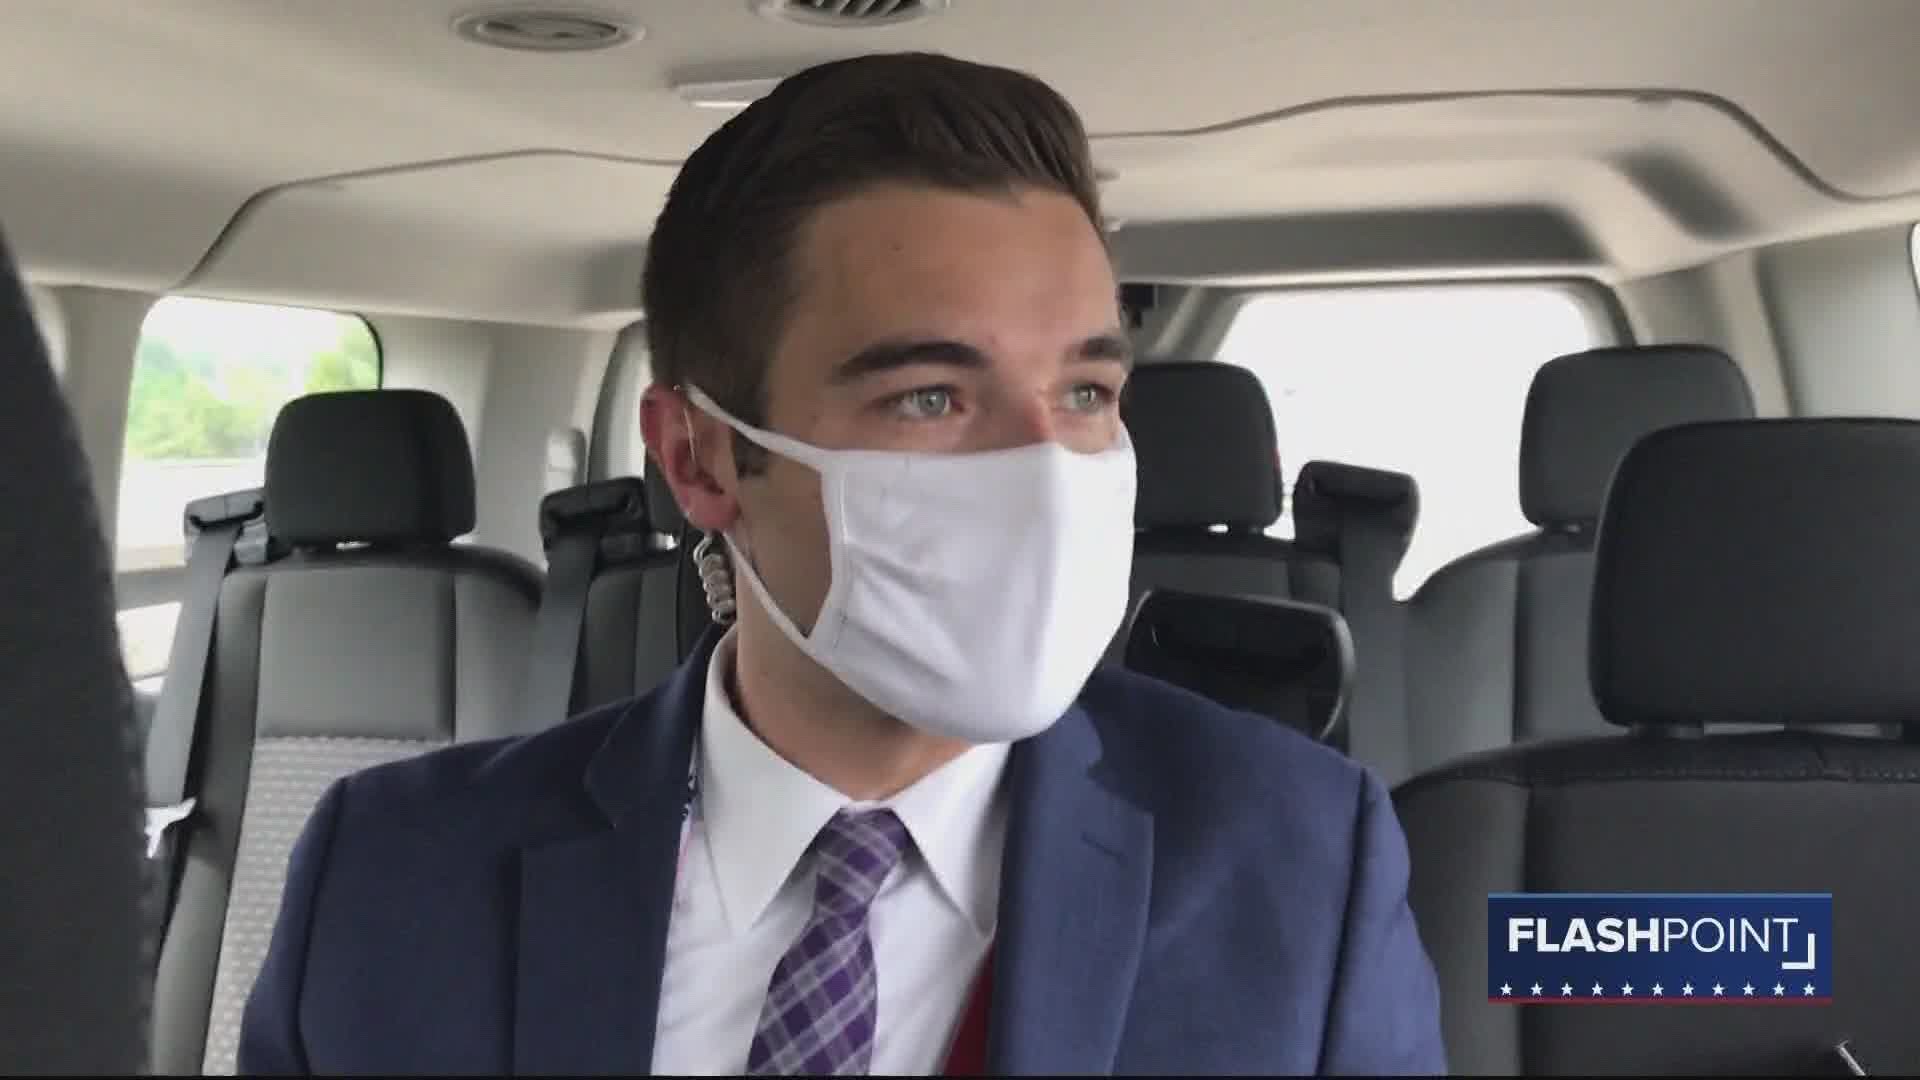 Flashpoint 8/30: WCNC Charlotte's, Hunter Saenz talks about his experience covering the RNC and the exclusive access he got to the president’s motorcade.